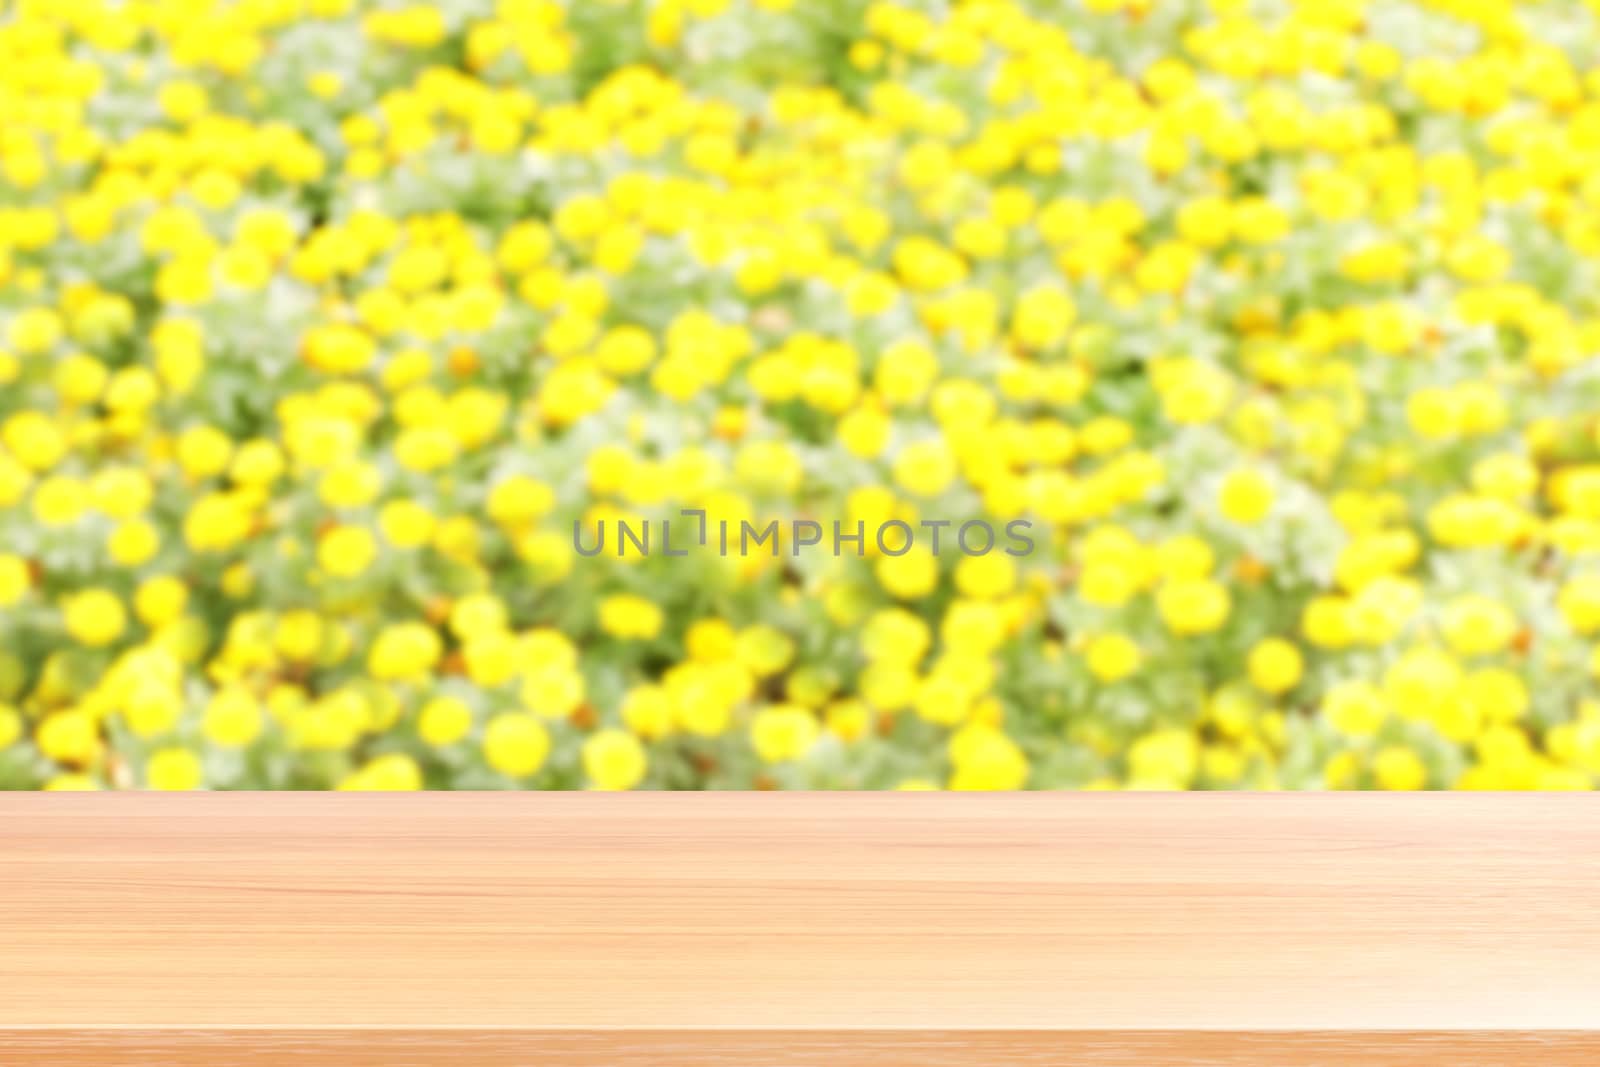 wood plank on blurred flower yellow soft background, empty wood table floors on blurred flower yellow soft garden nature background, wood table board empty for mock up display products by cgdeaw